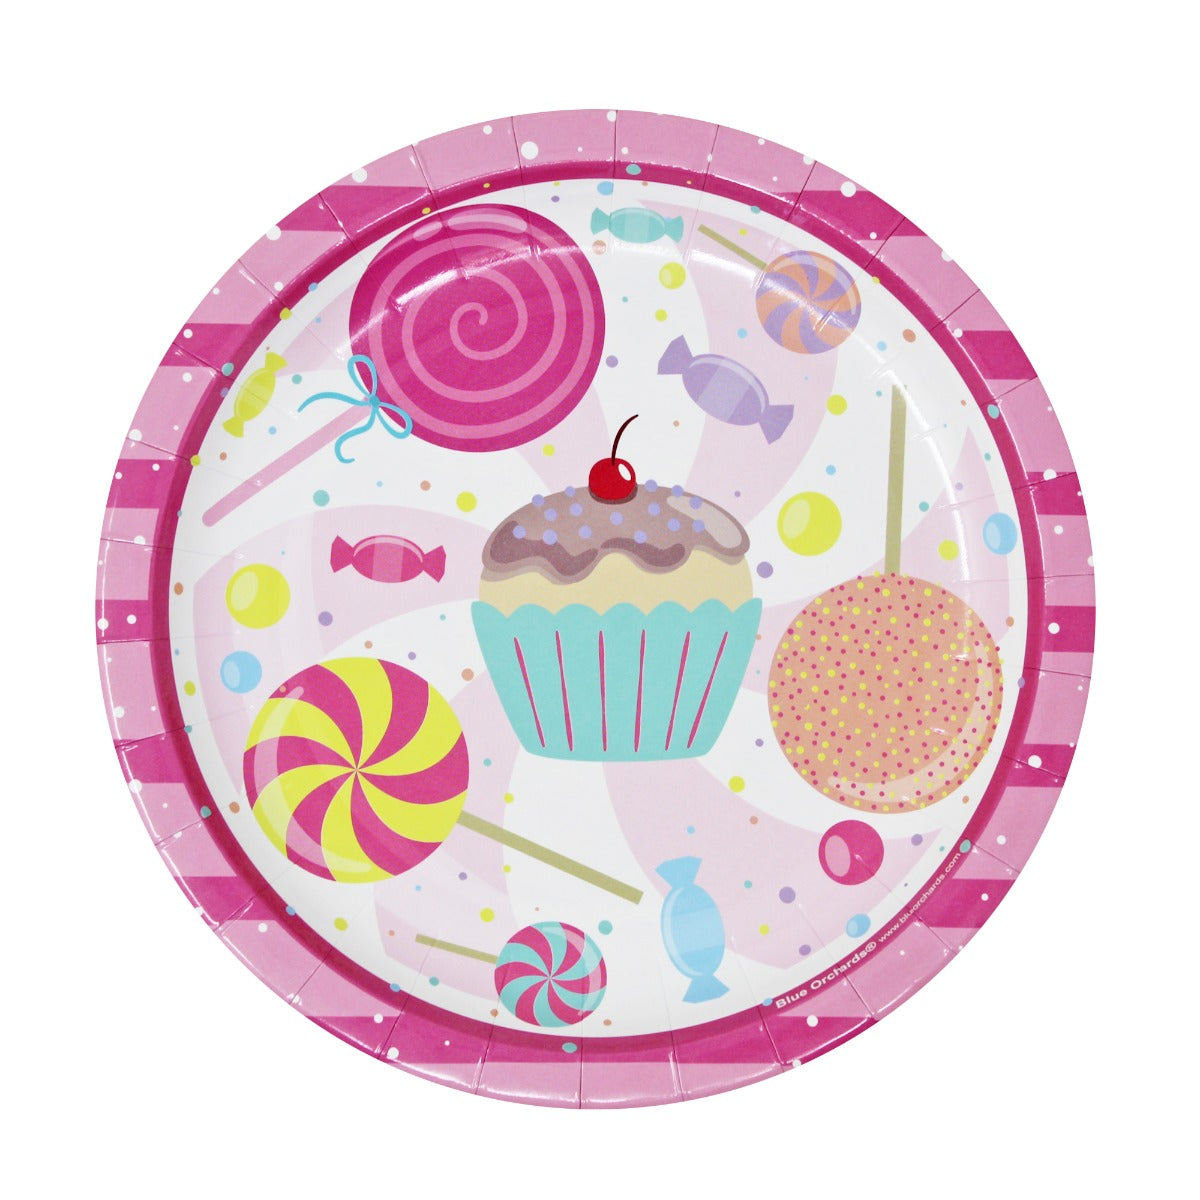 Candy Party Plates, Candy Plates, Ice Cream Party Plates, Candyland Birthday Party Plates